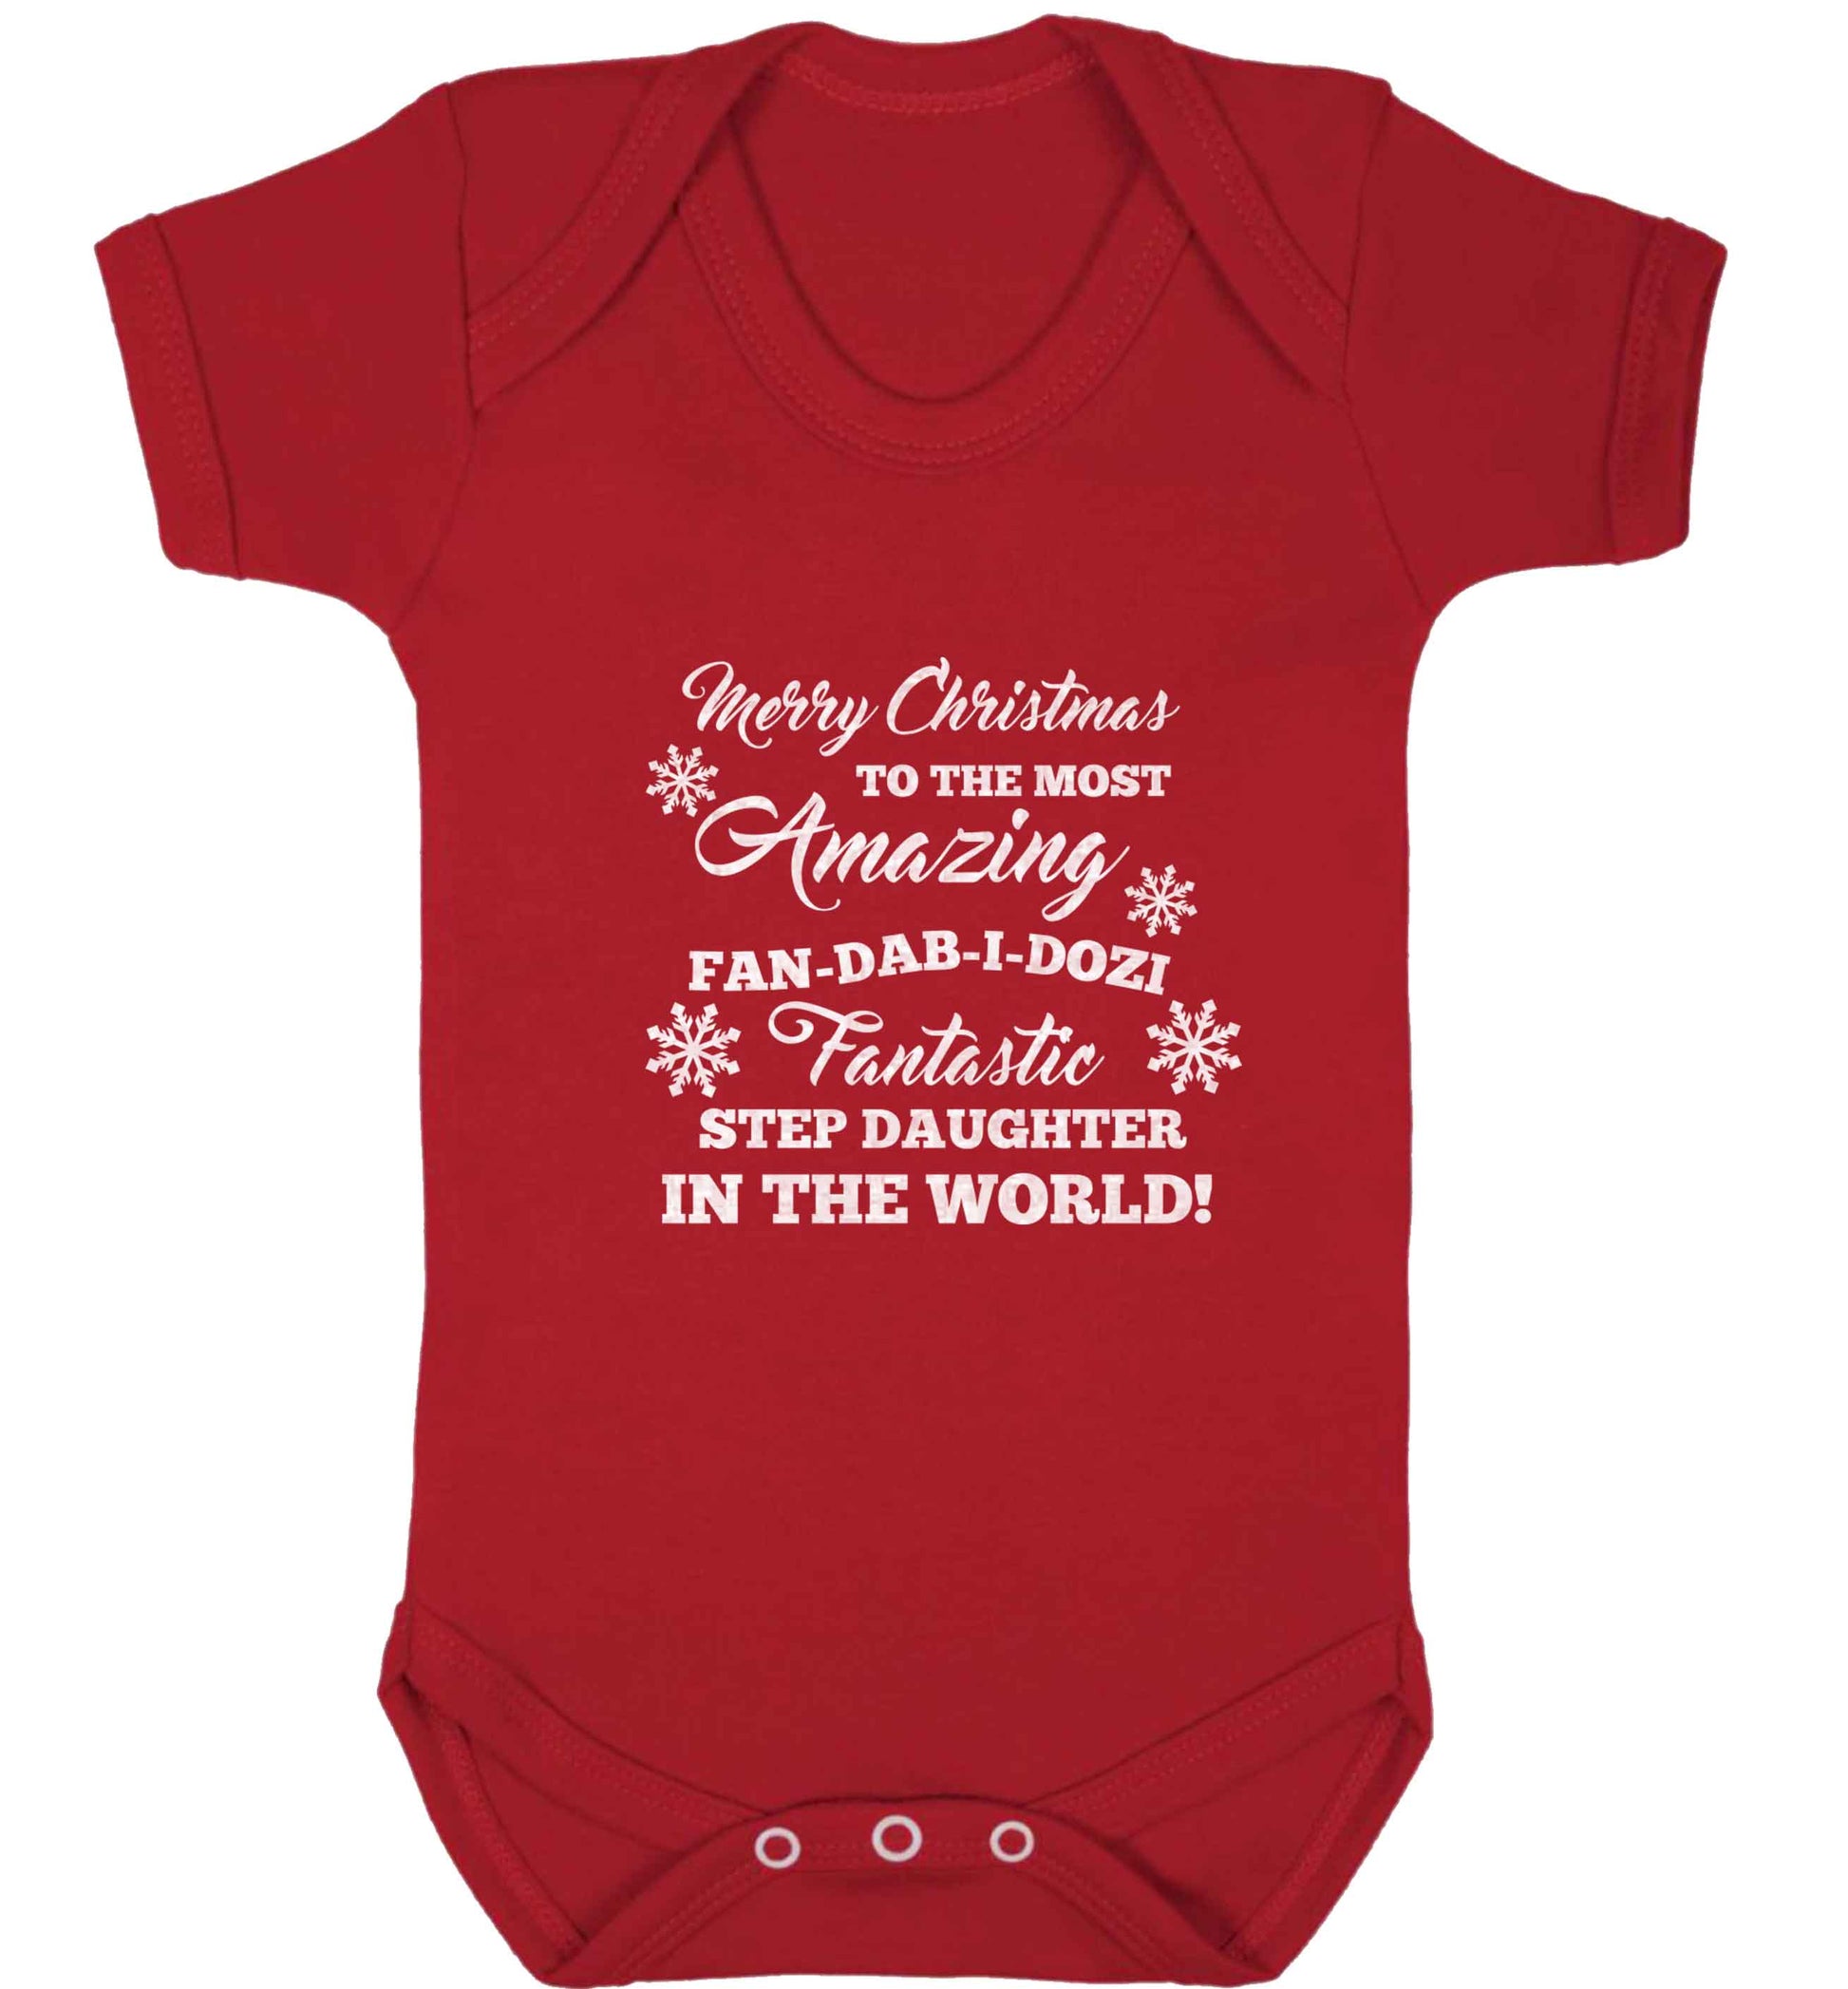 Merry Christmas to the most amazing fan-dab-i-dozi fantasic Step Daughter in the world baby vest red 18-24 months